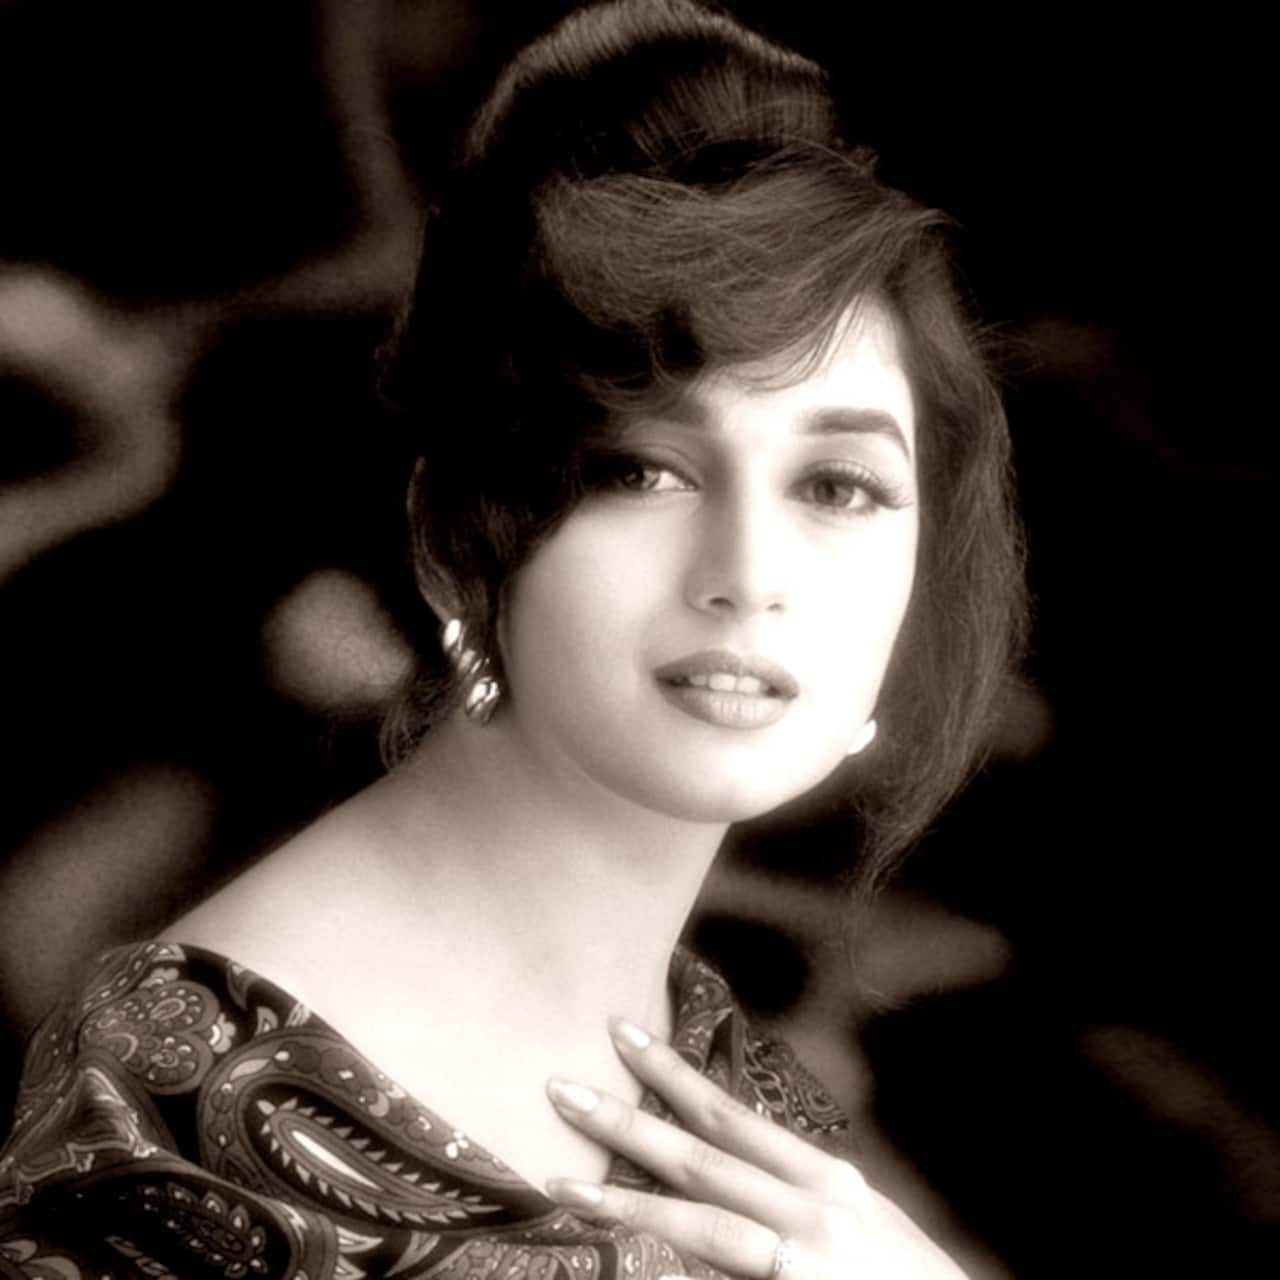 Madhuri Dixit in a sensuous pose for a photoshoot